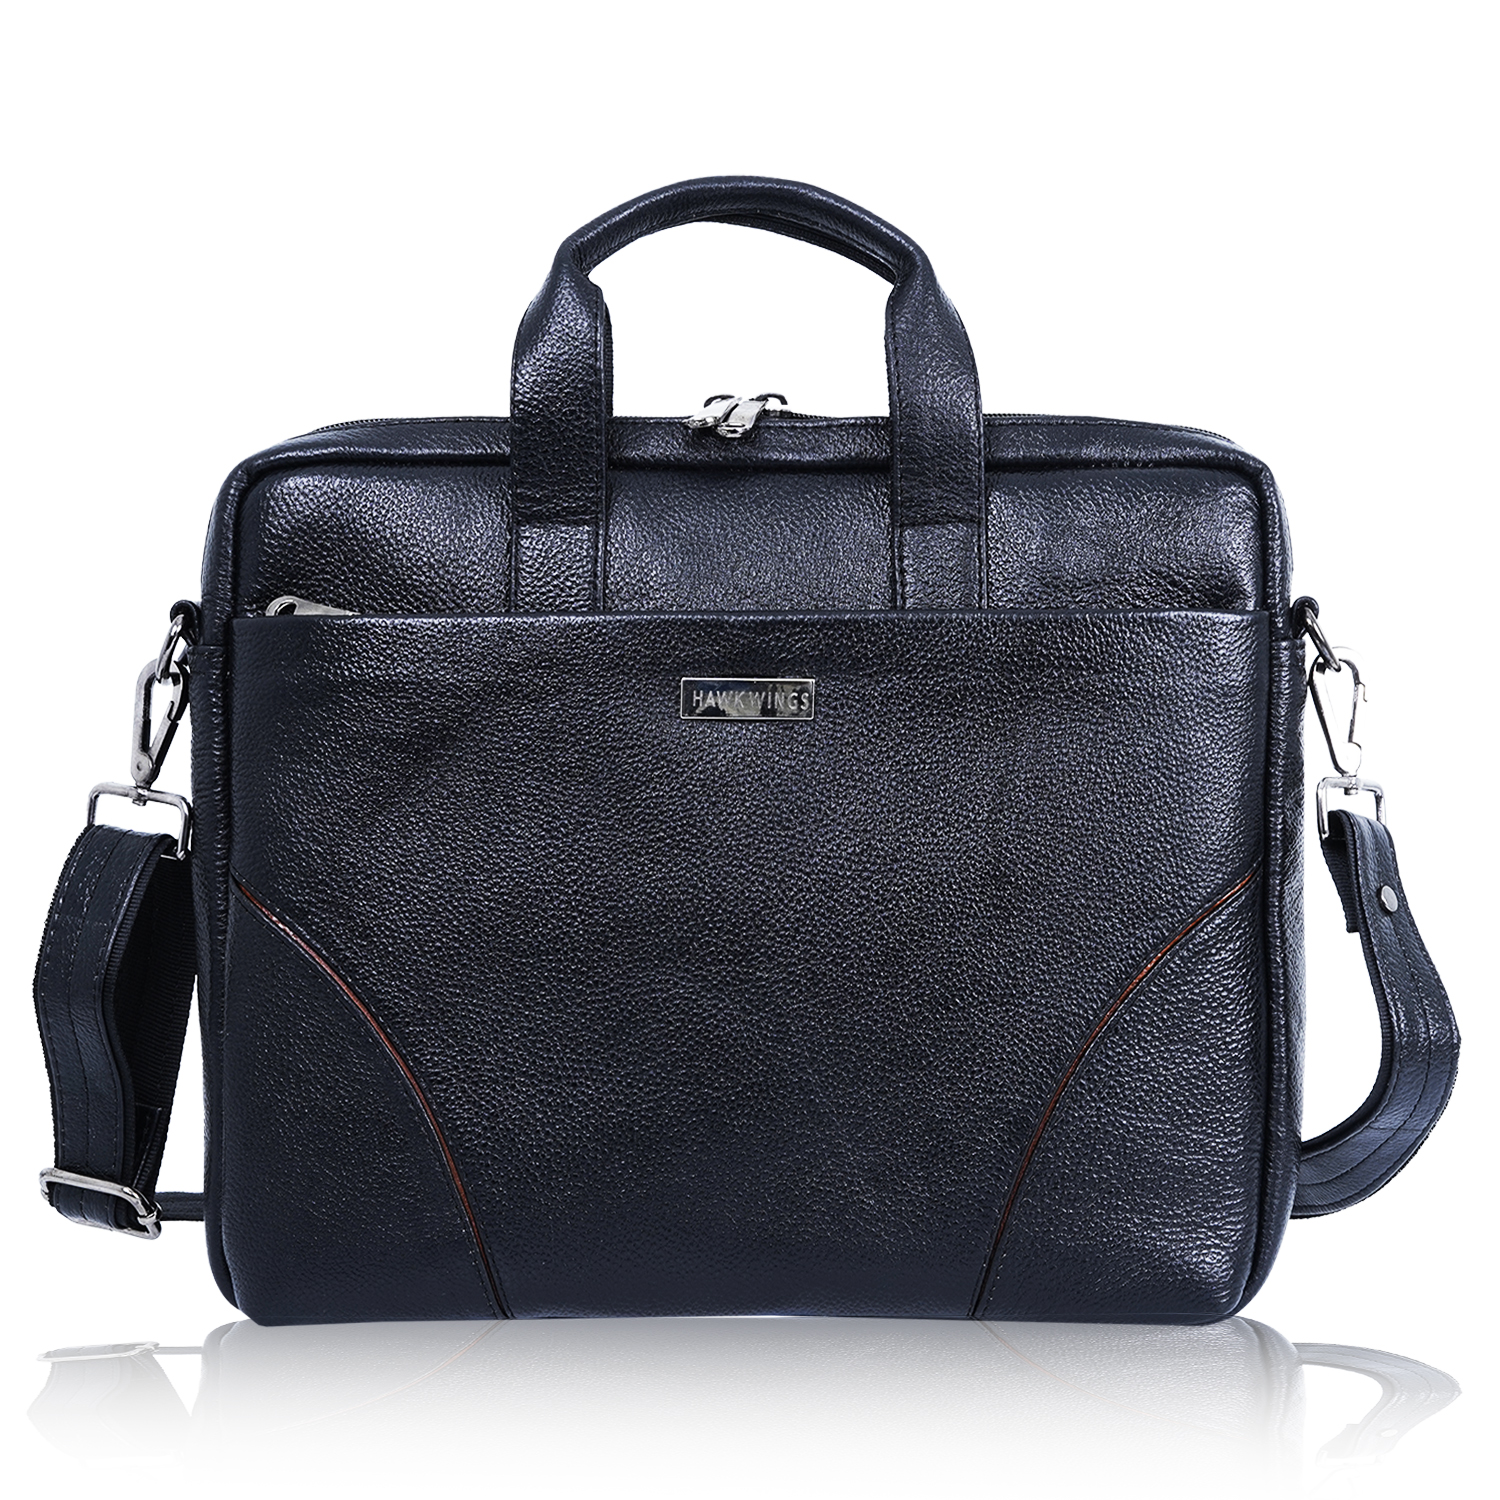 BERLIN Genuine Leather Executive Formal Office Bag